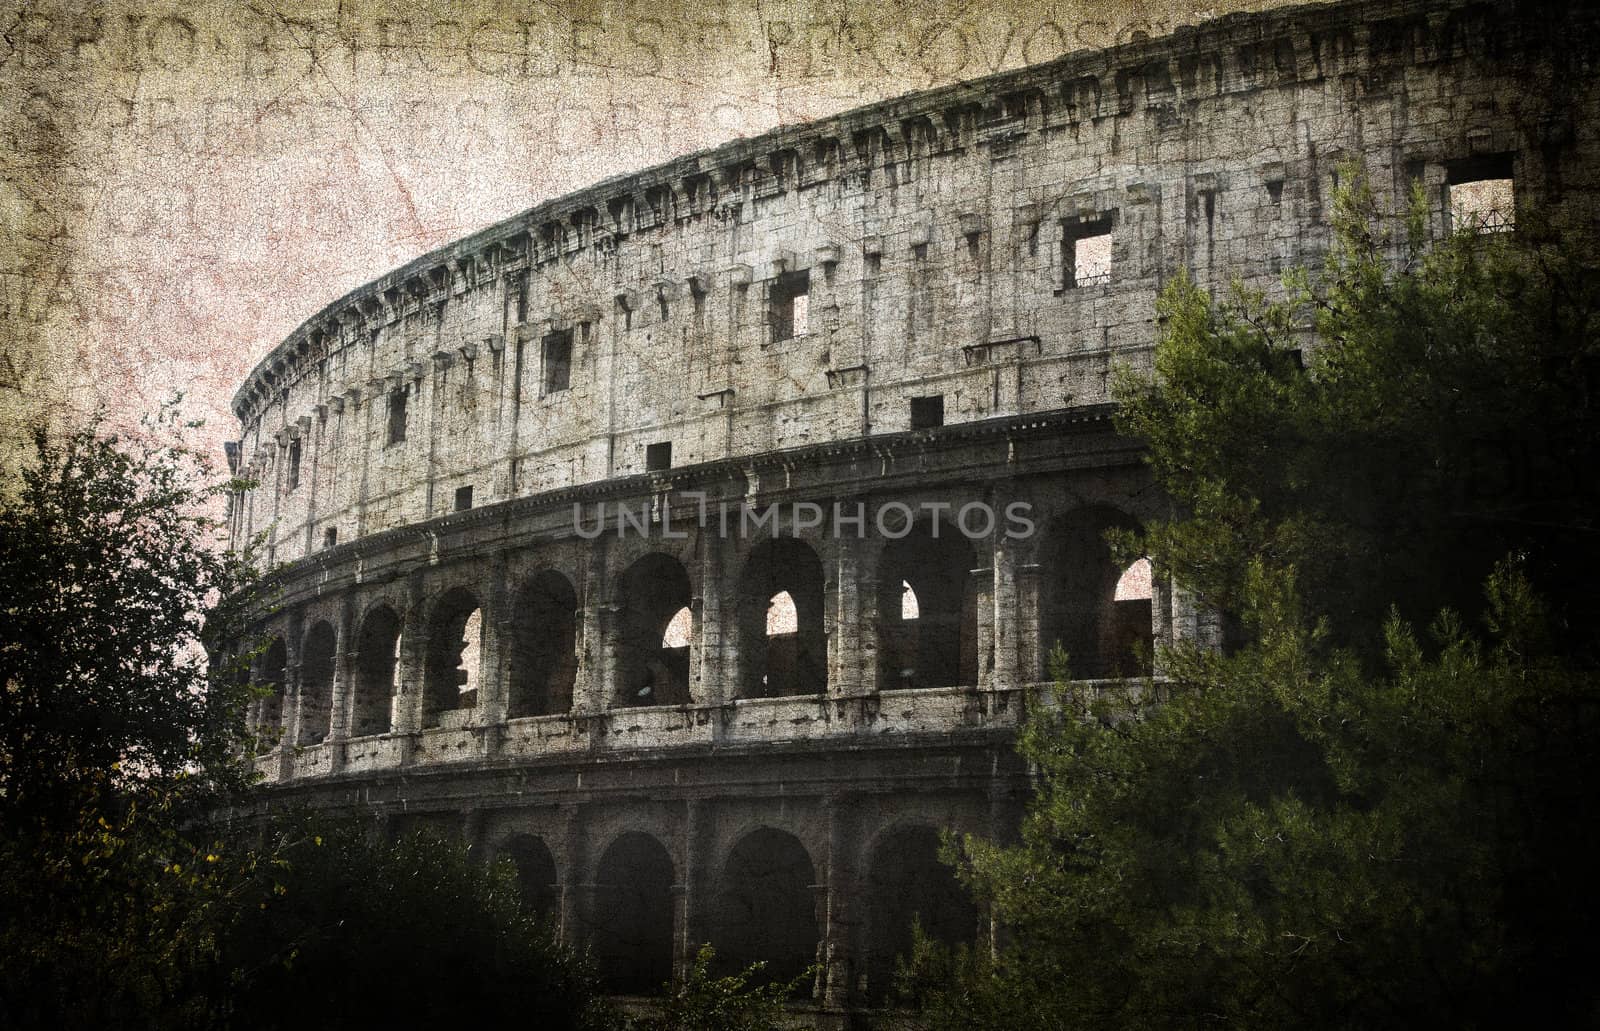 Detail of the Colosseum - Rome, Italy. Postcard from Rome. More of my images worked together to reflect age and time.